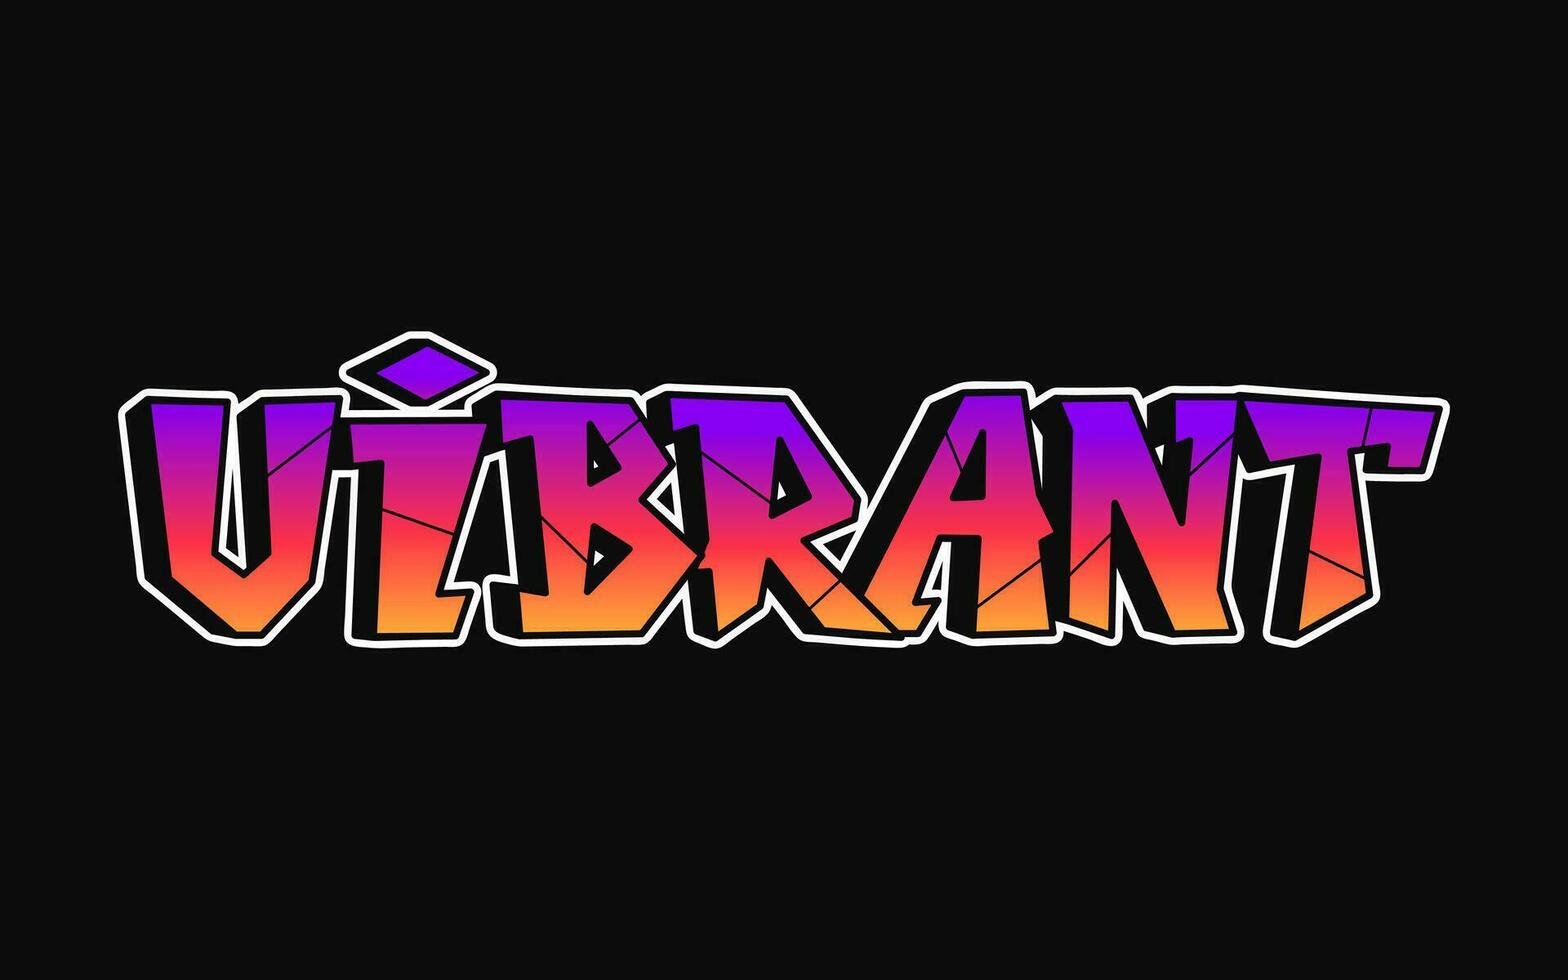 Vibrant - single word, letters graffiti style. Vector hand drawn logo. Funny cool trippy word Vibrant, fashion, graffiti style print t-shirt, poster concept